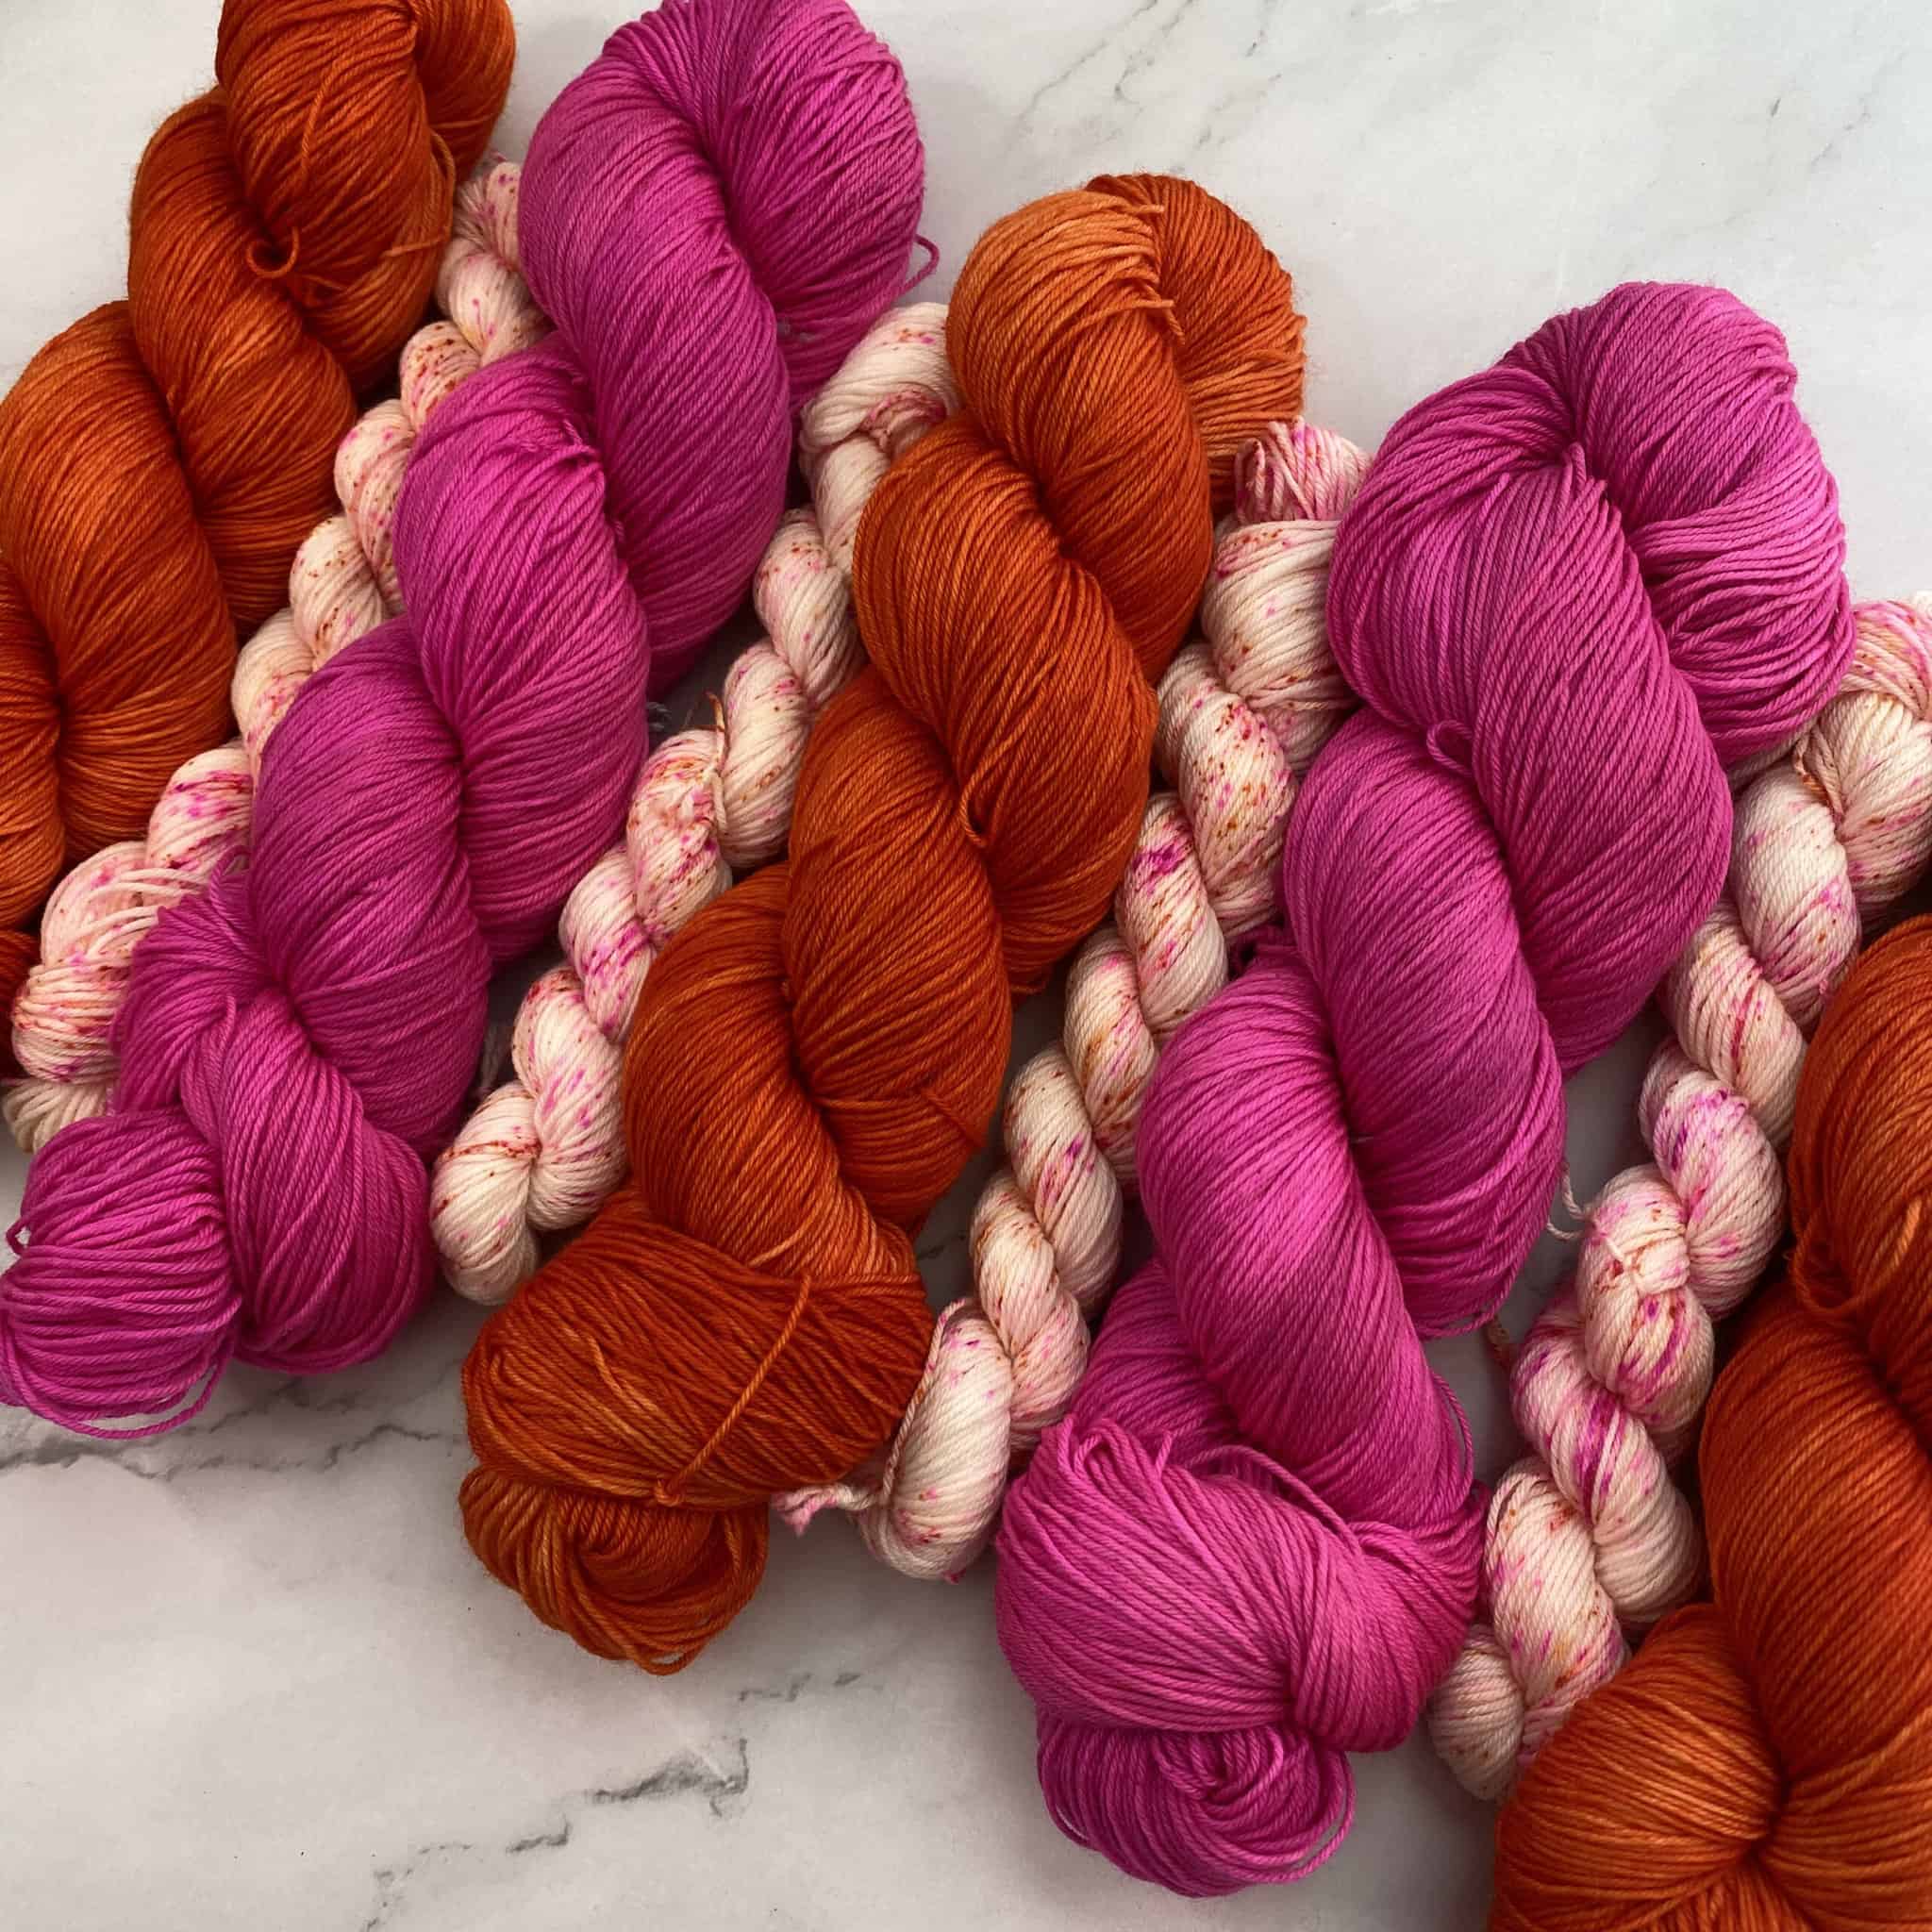 Skeins of hot pink and orange yarn with small, speckled mini skeins in between.